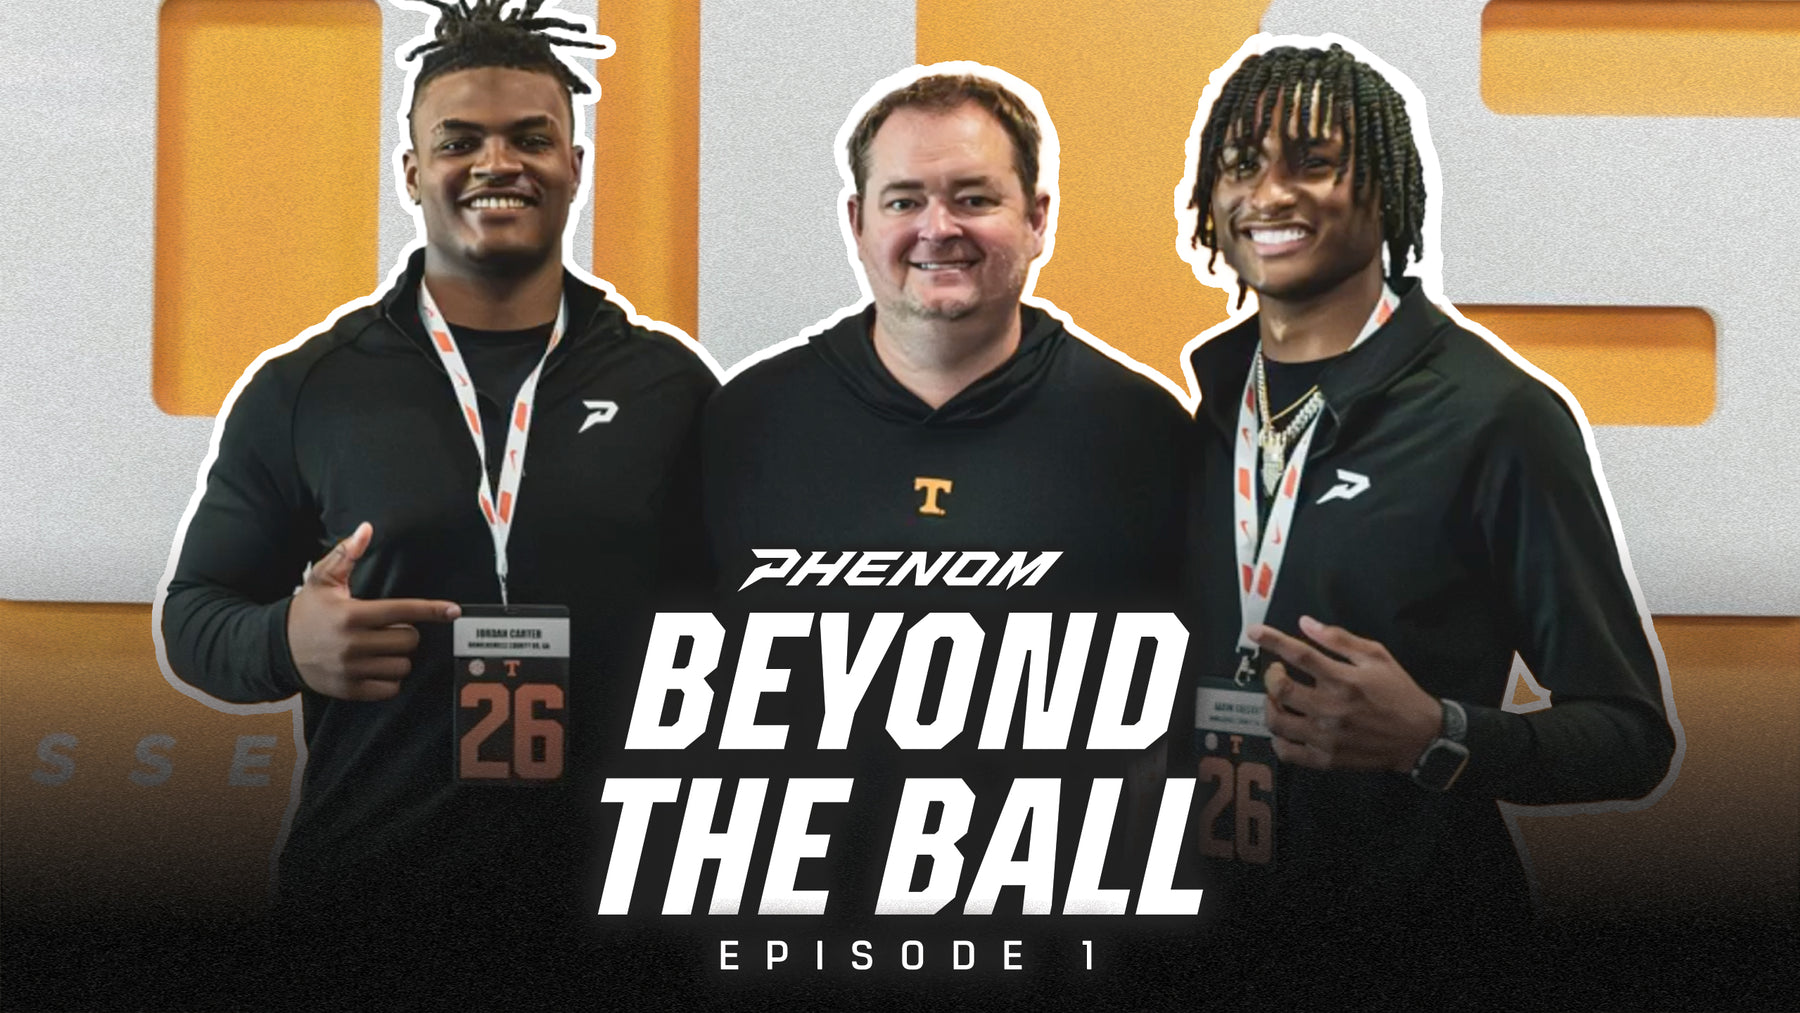 Beyond The Ball Episode 1: University of Tennessee Visit